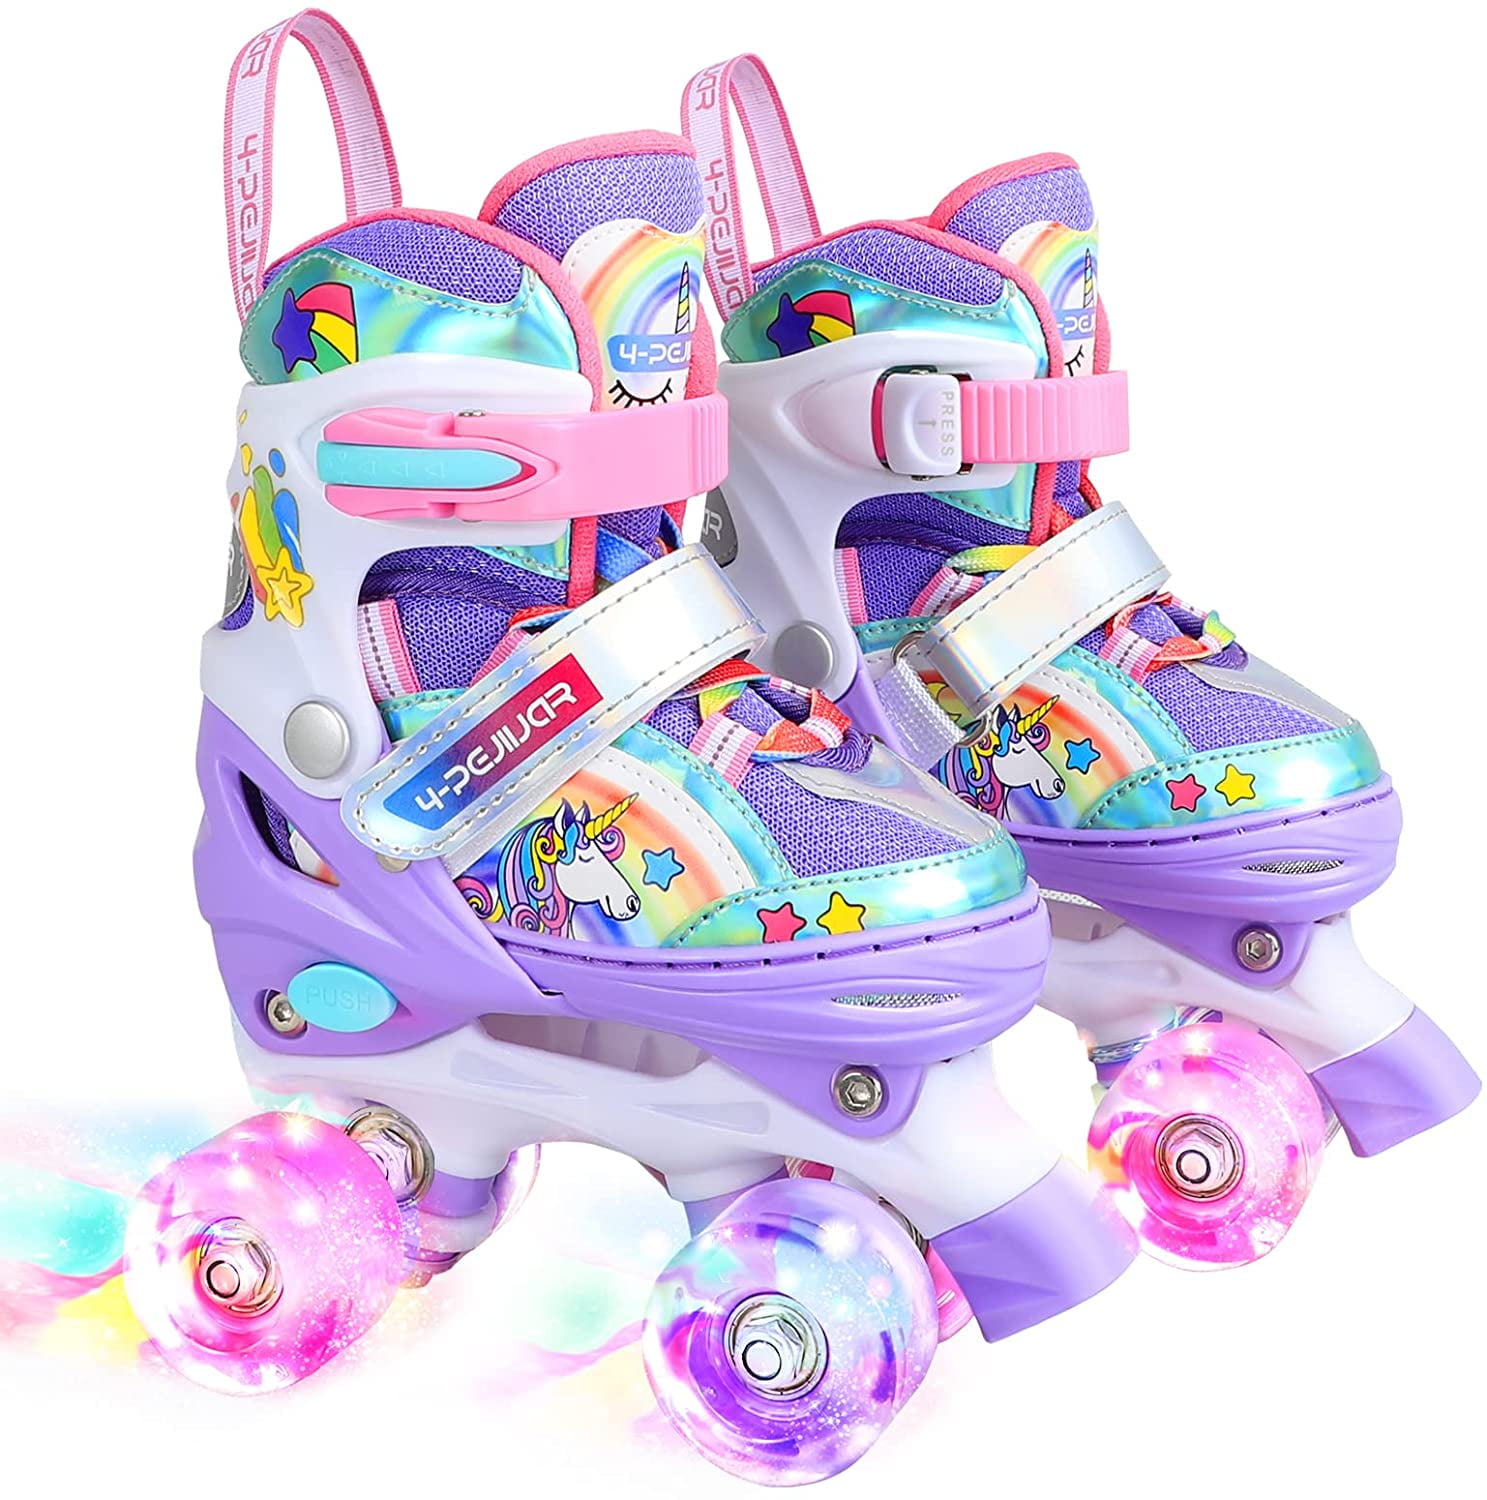 Youth Roller Skates for Girls Boys and Kids 3 Size Adjustable Toddler Flashing_1 